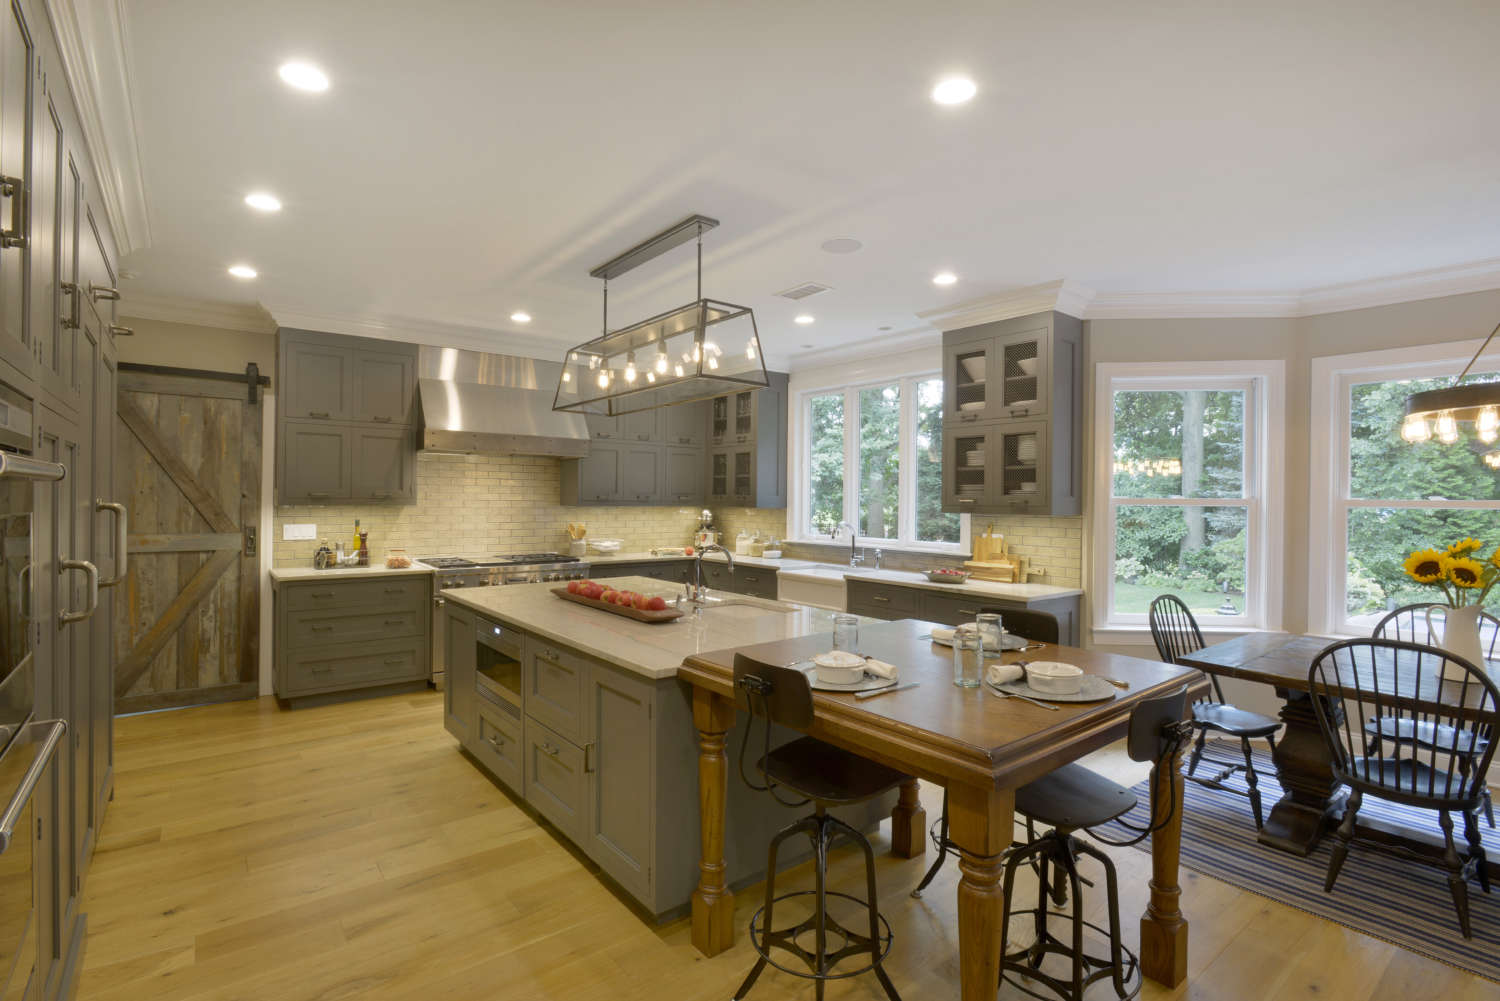 Classic country kitchen features gray Bilotta cabinetry, glazed brick subway tile and reclaimed wood flooring.